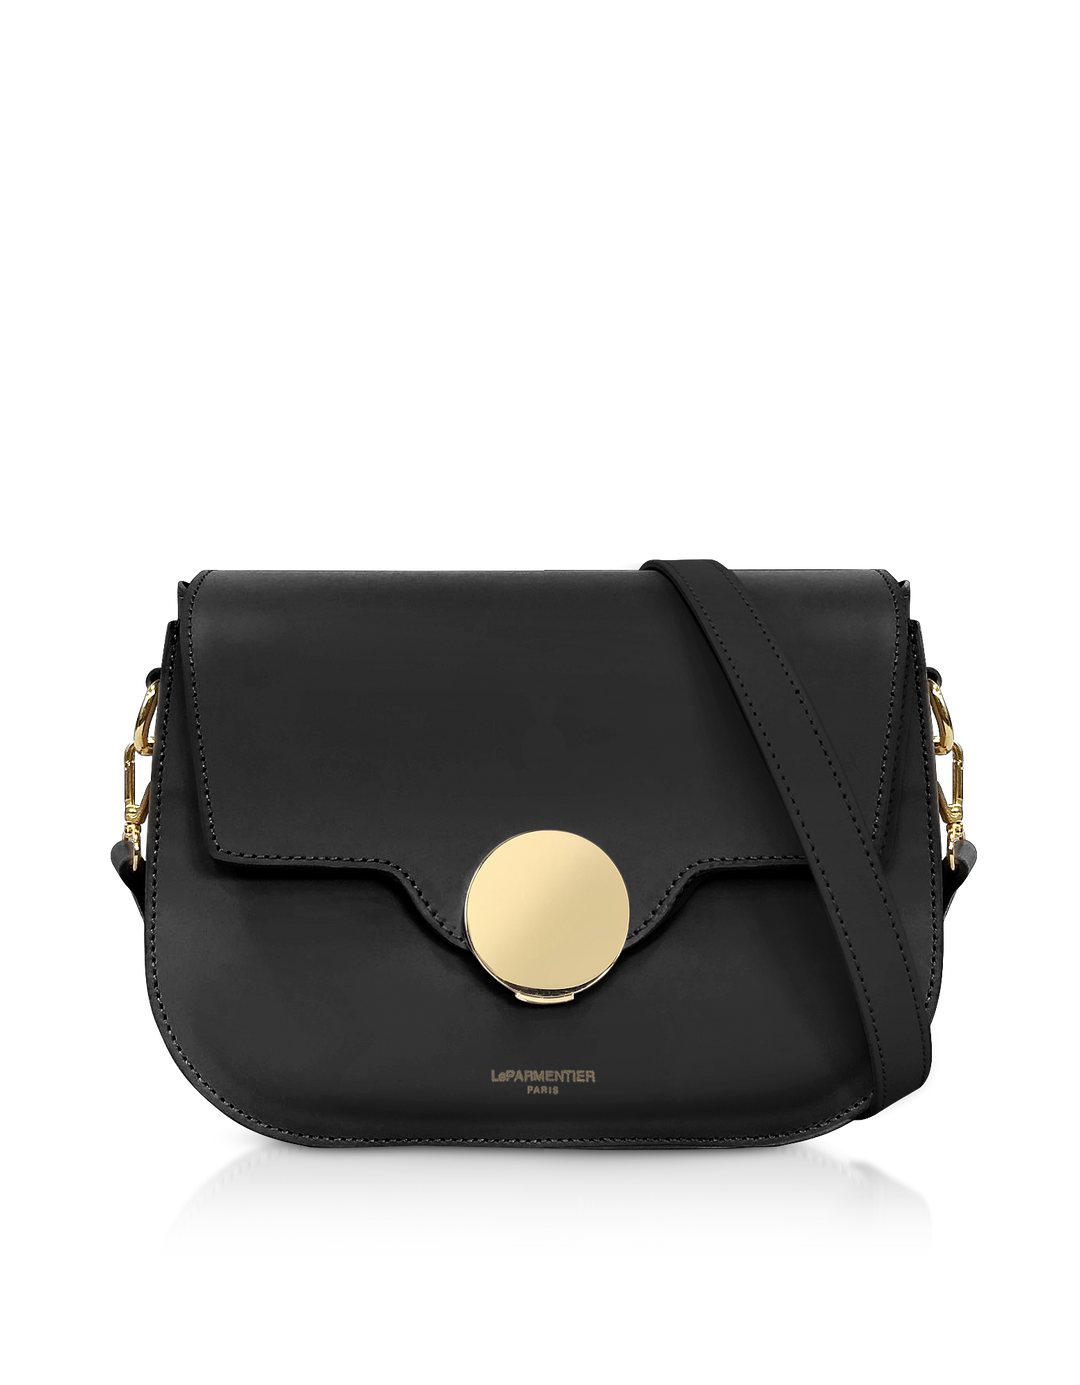 Black leather crossbody bag with gold circular clasp and adjustable strap